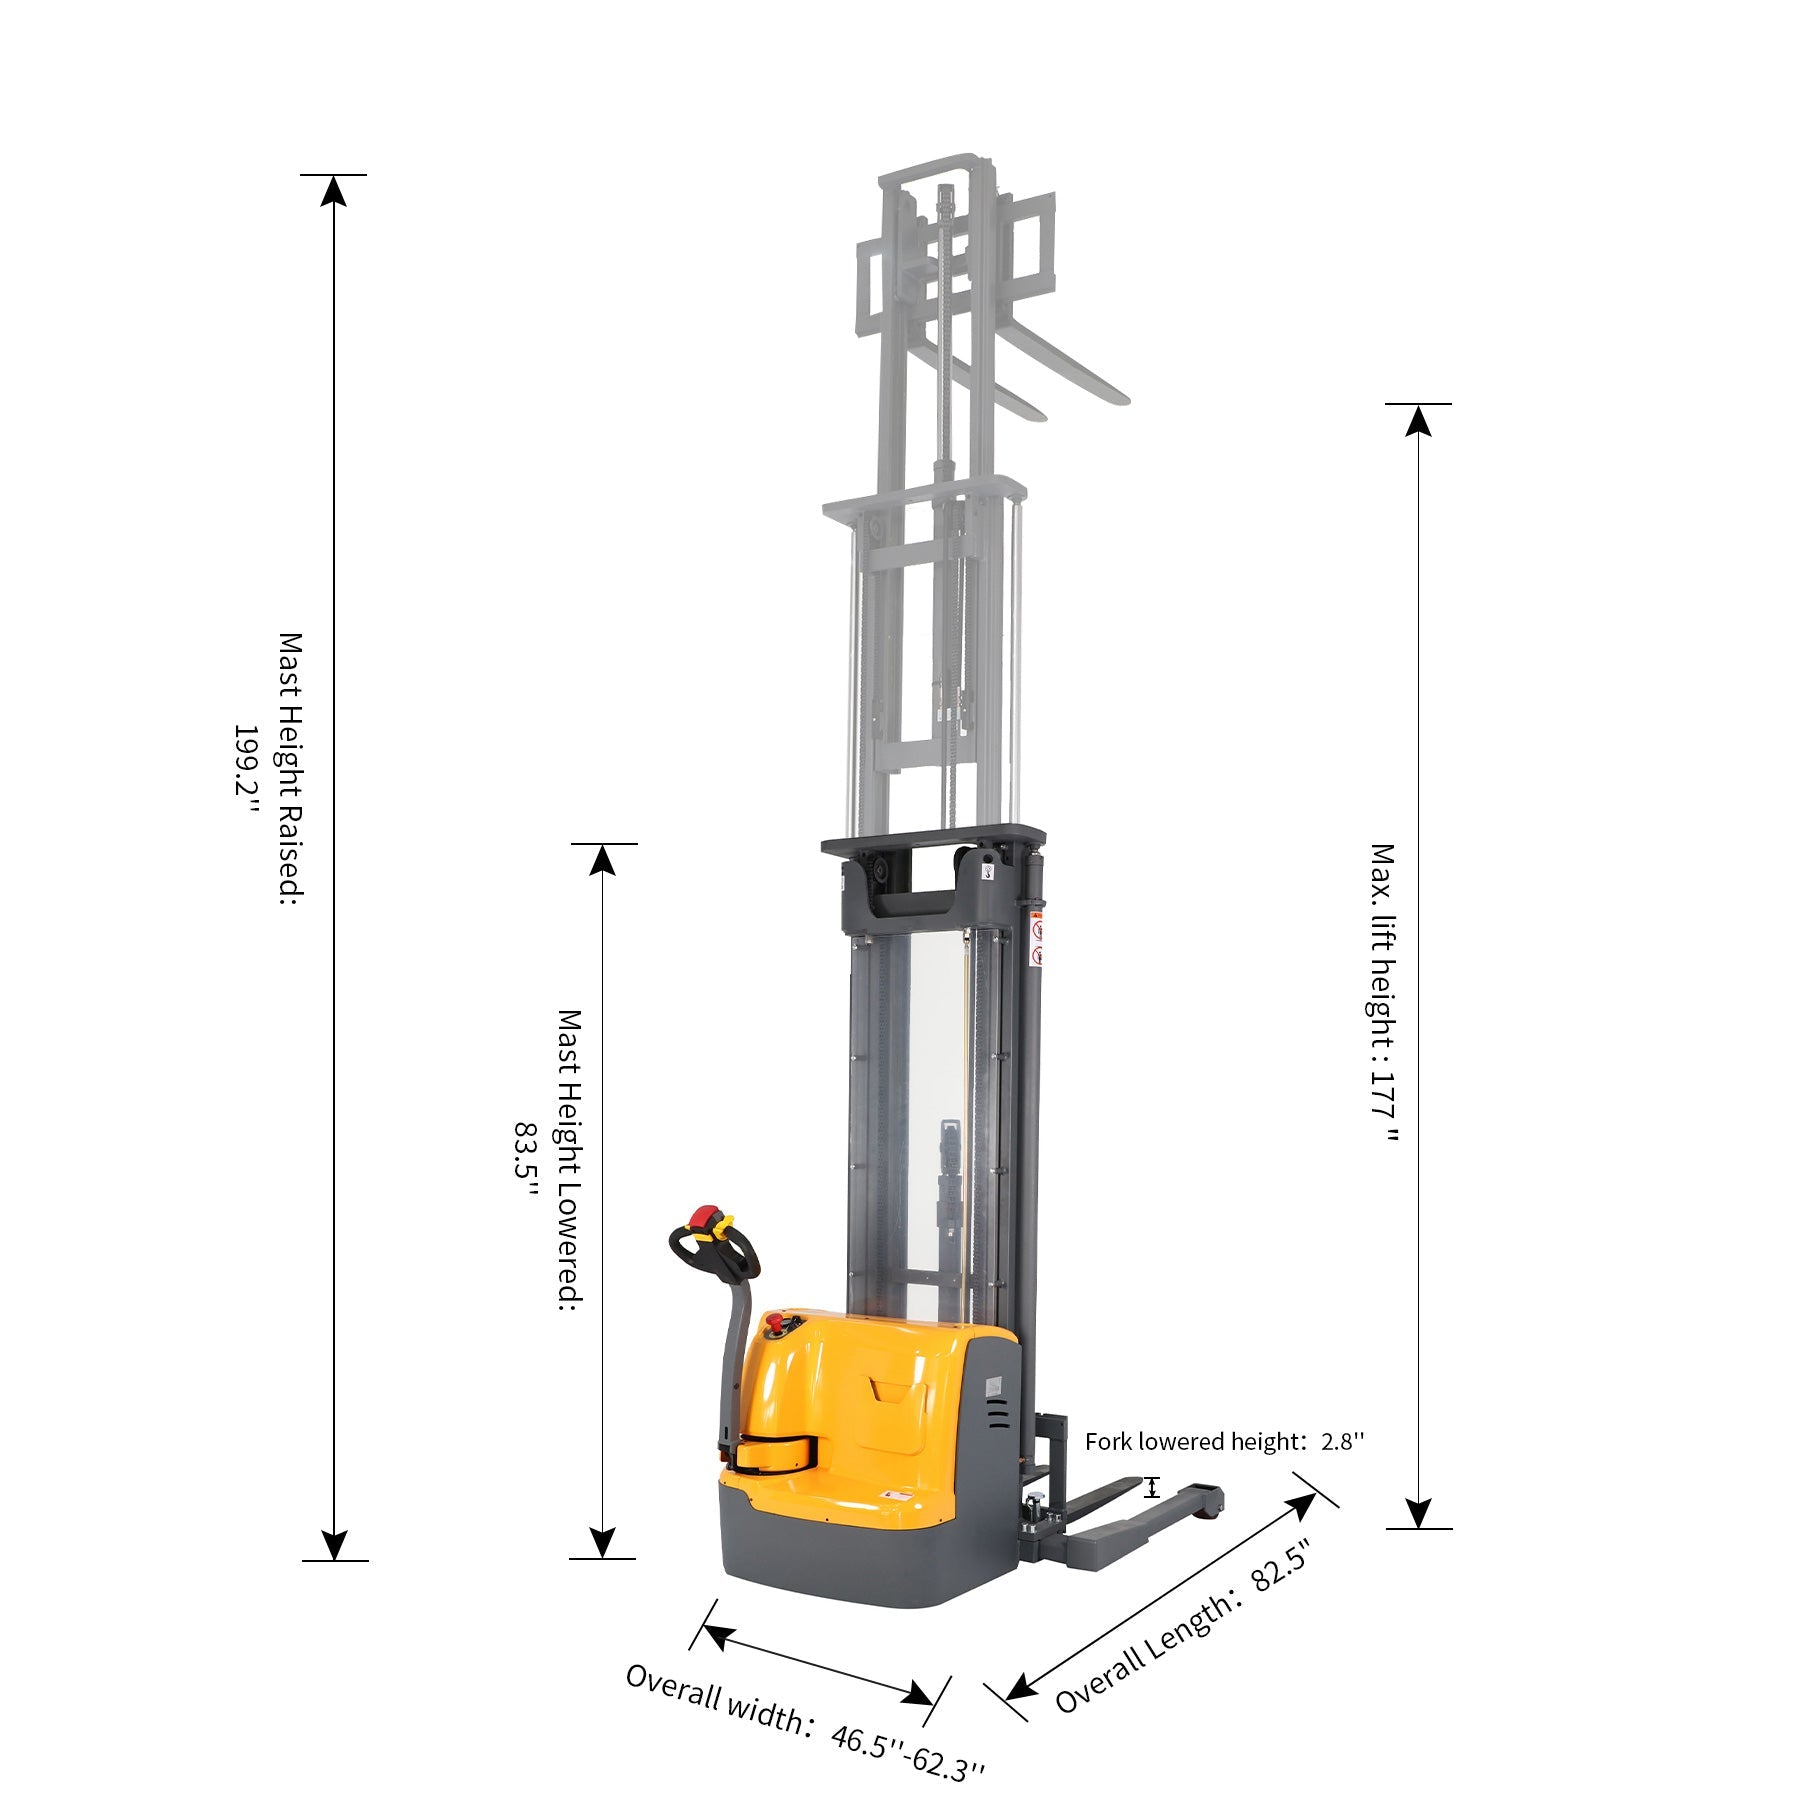 ApolloLift | Powered Forklift Full Electric Walkie Stacker 3300 lbs Cap. 177"Lifting A-3029